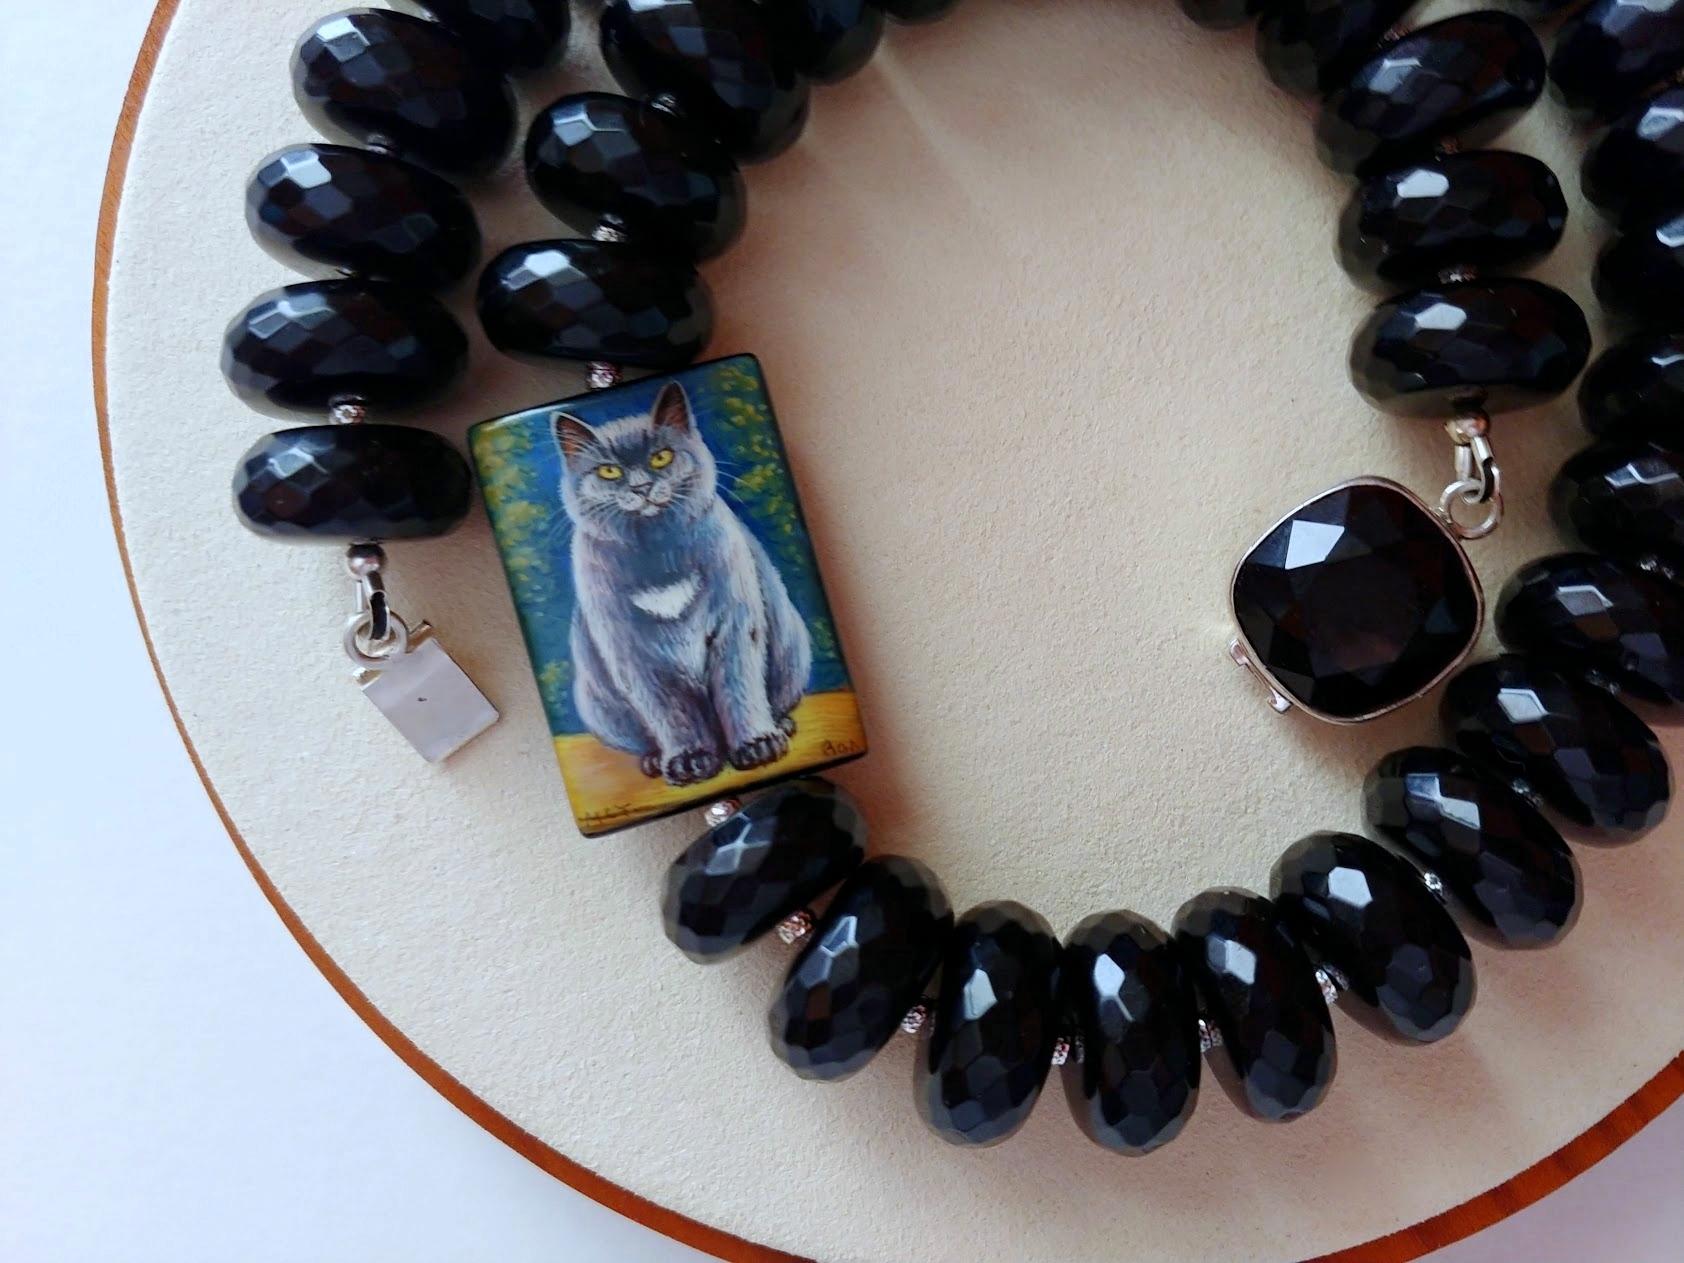 The length of the necklace is 21 inches (53 cm). The size of the faceted rondelle beads is 20 mm.
The color of the beads is uniform, saturated, brightly black, and deep, with a bright glass shine.
The color is authentic and natural. No thermal or